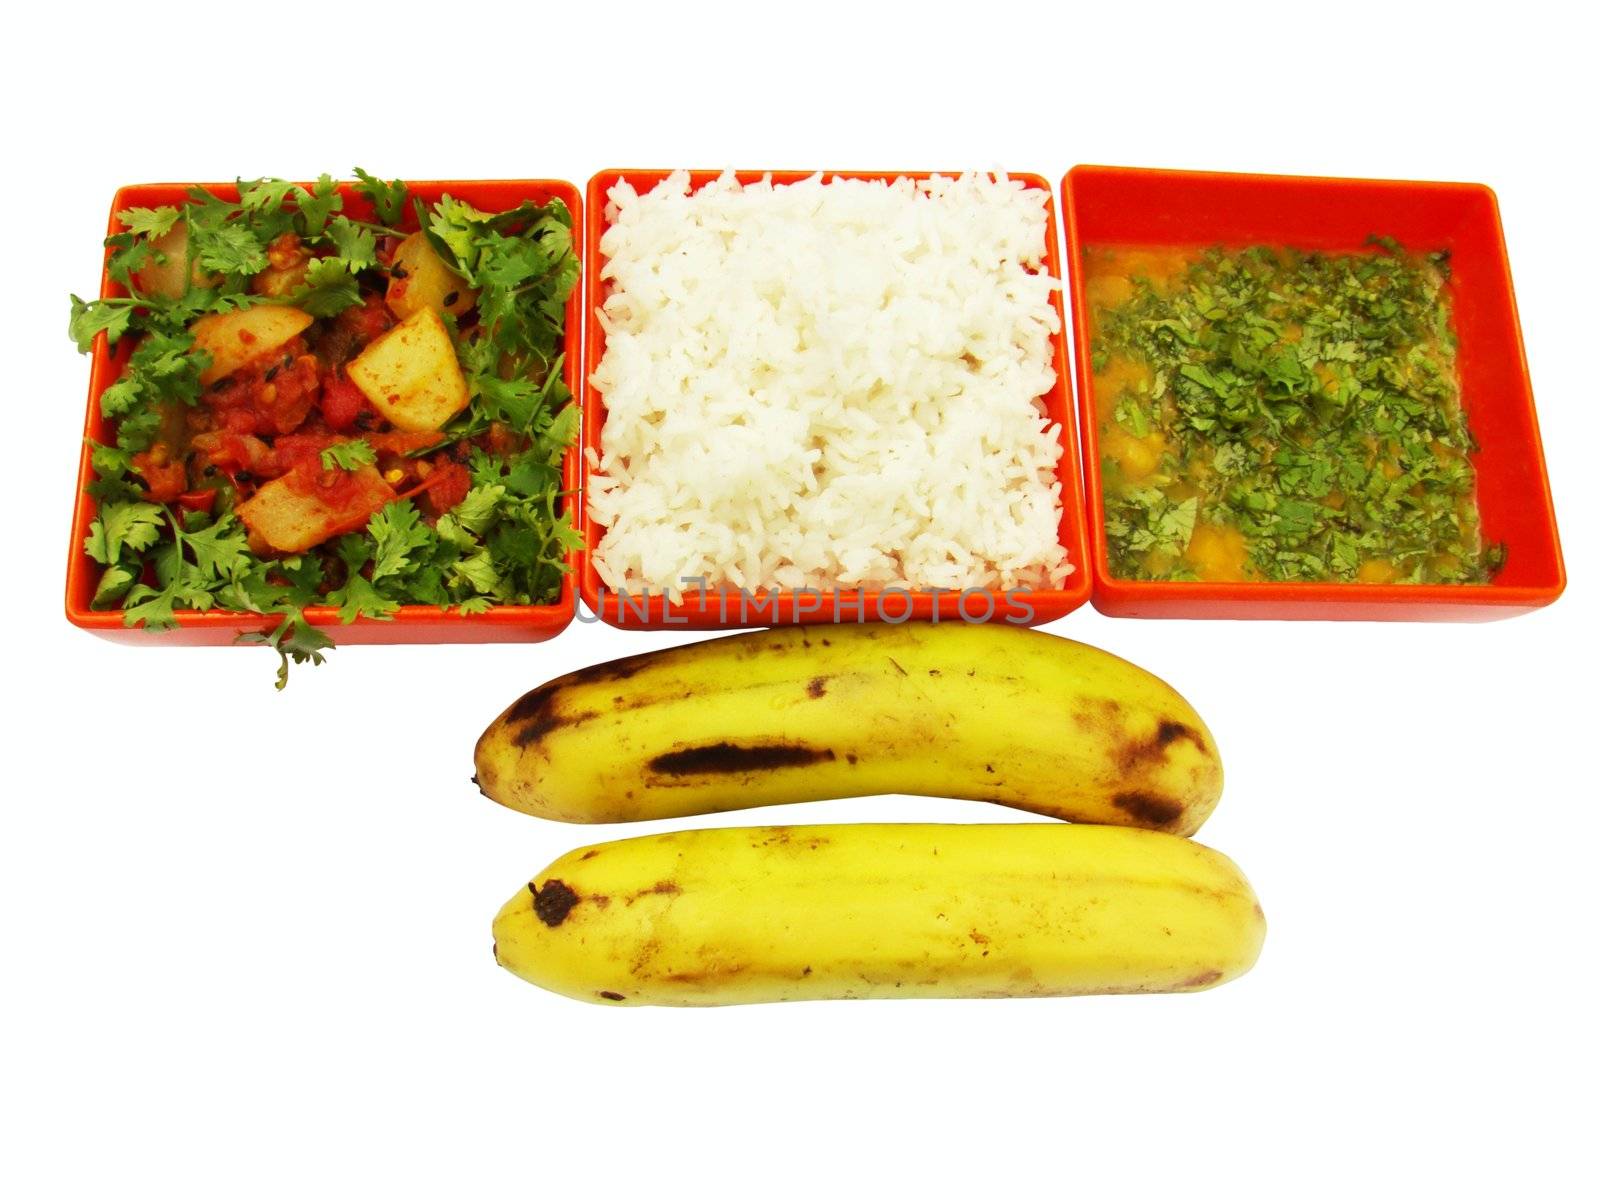 Vegetarian meal isolated on white. Meal contains steamed rice, cooked vegetables, cooked lentils and two ripen bananas